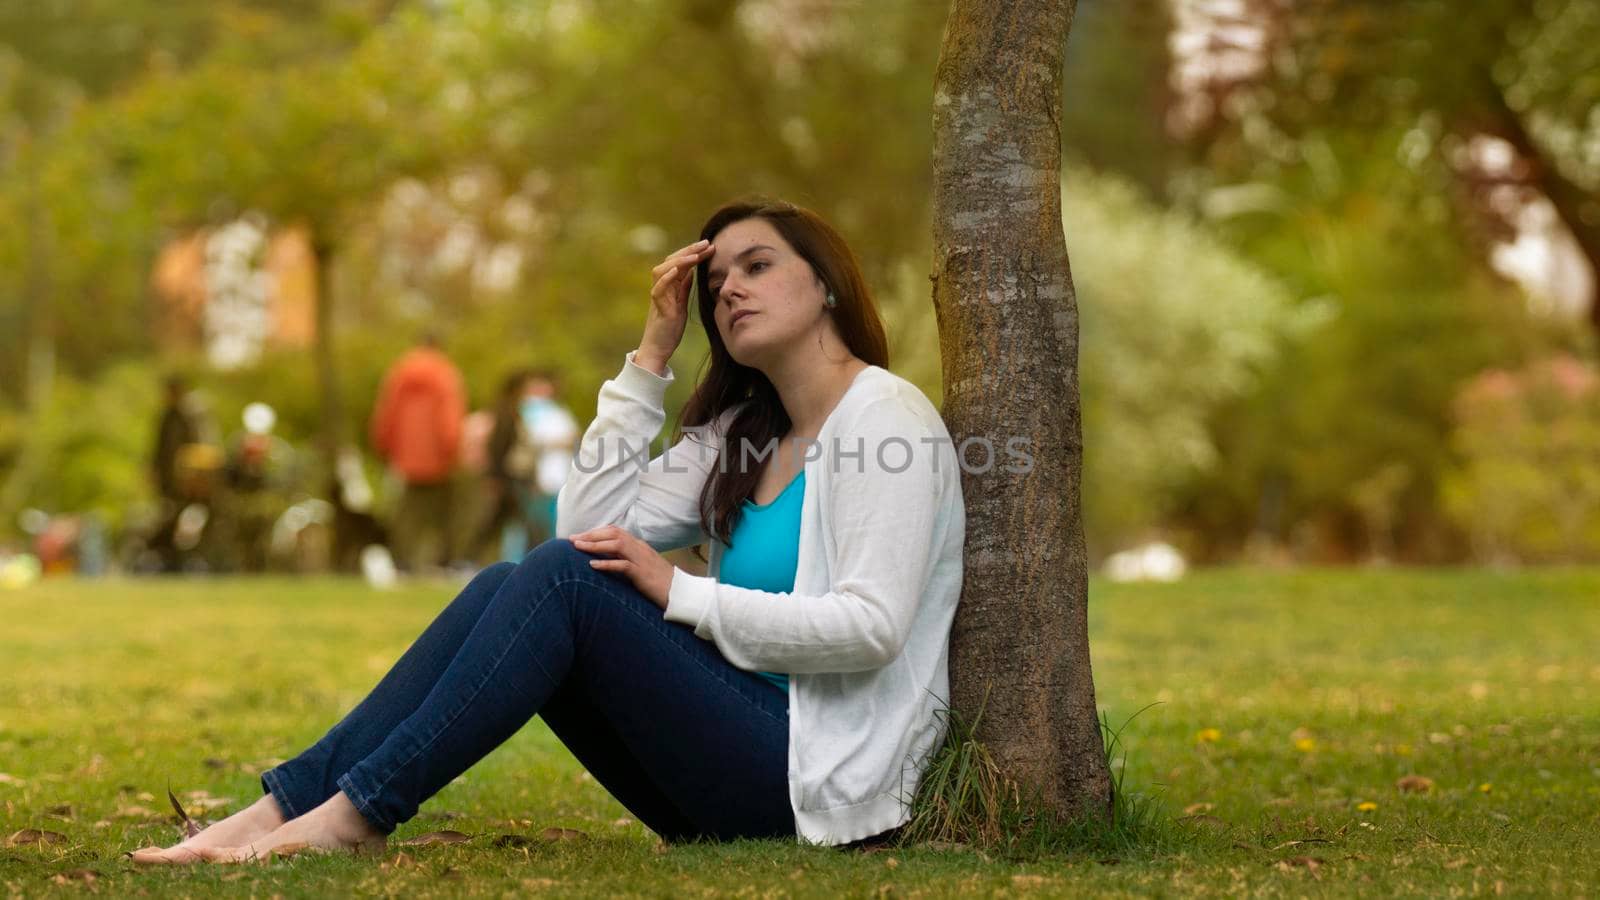 Portrait of beautiful young Hispanic woman sitting under a tree in the middle of a park with a pensive attitude against a background of unfocused trees during the day